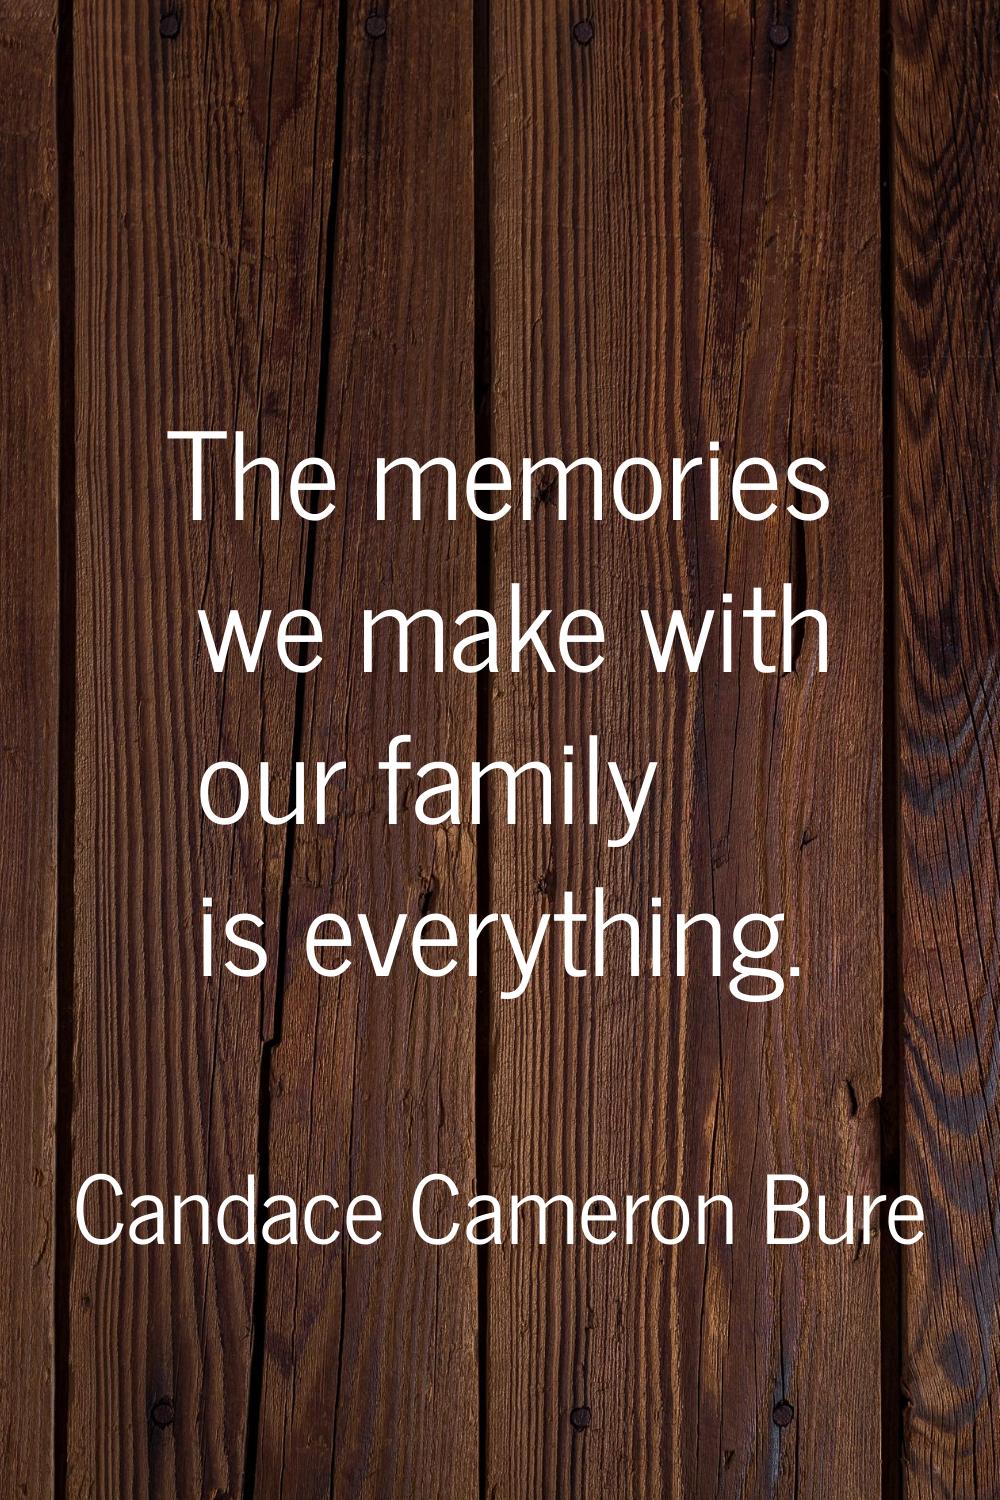 The memories we make with our family is everything.